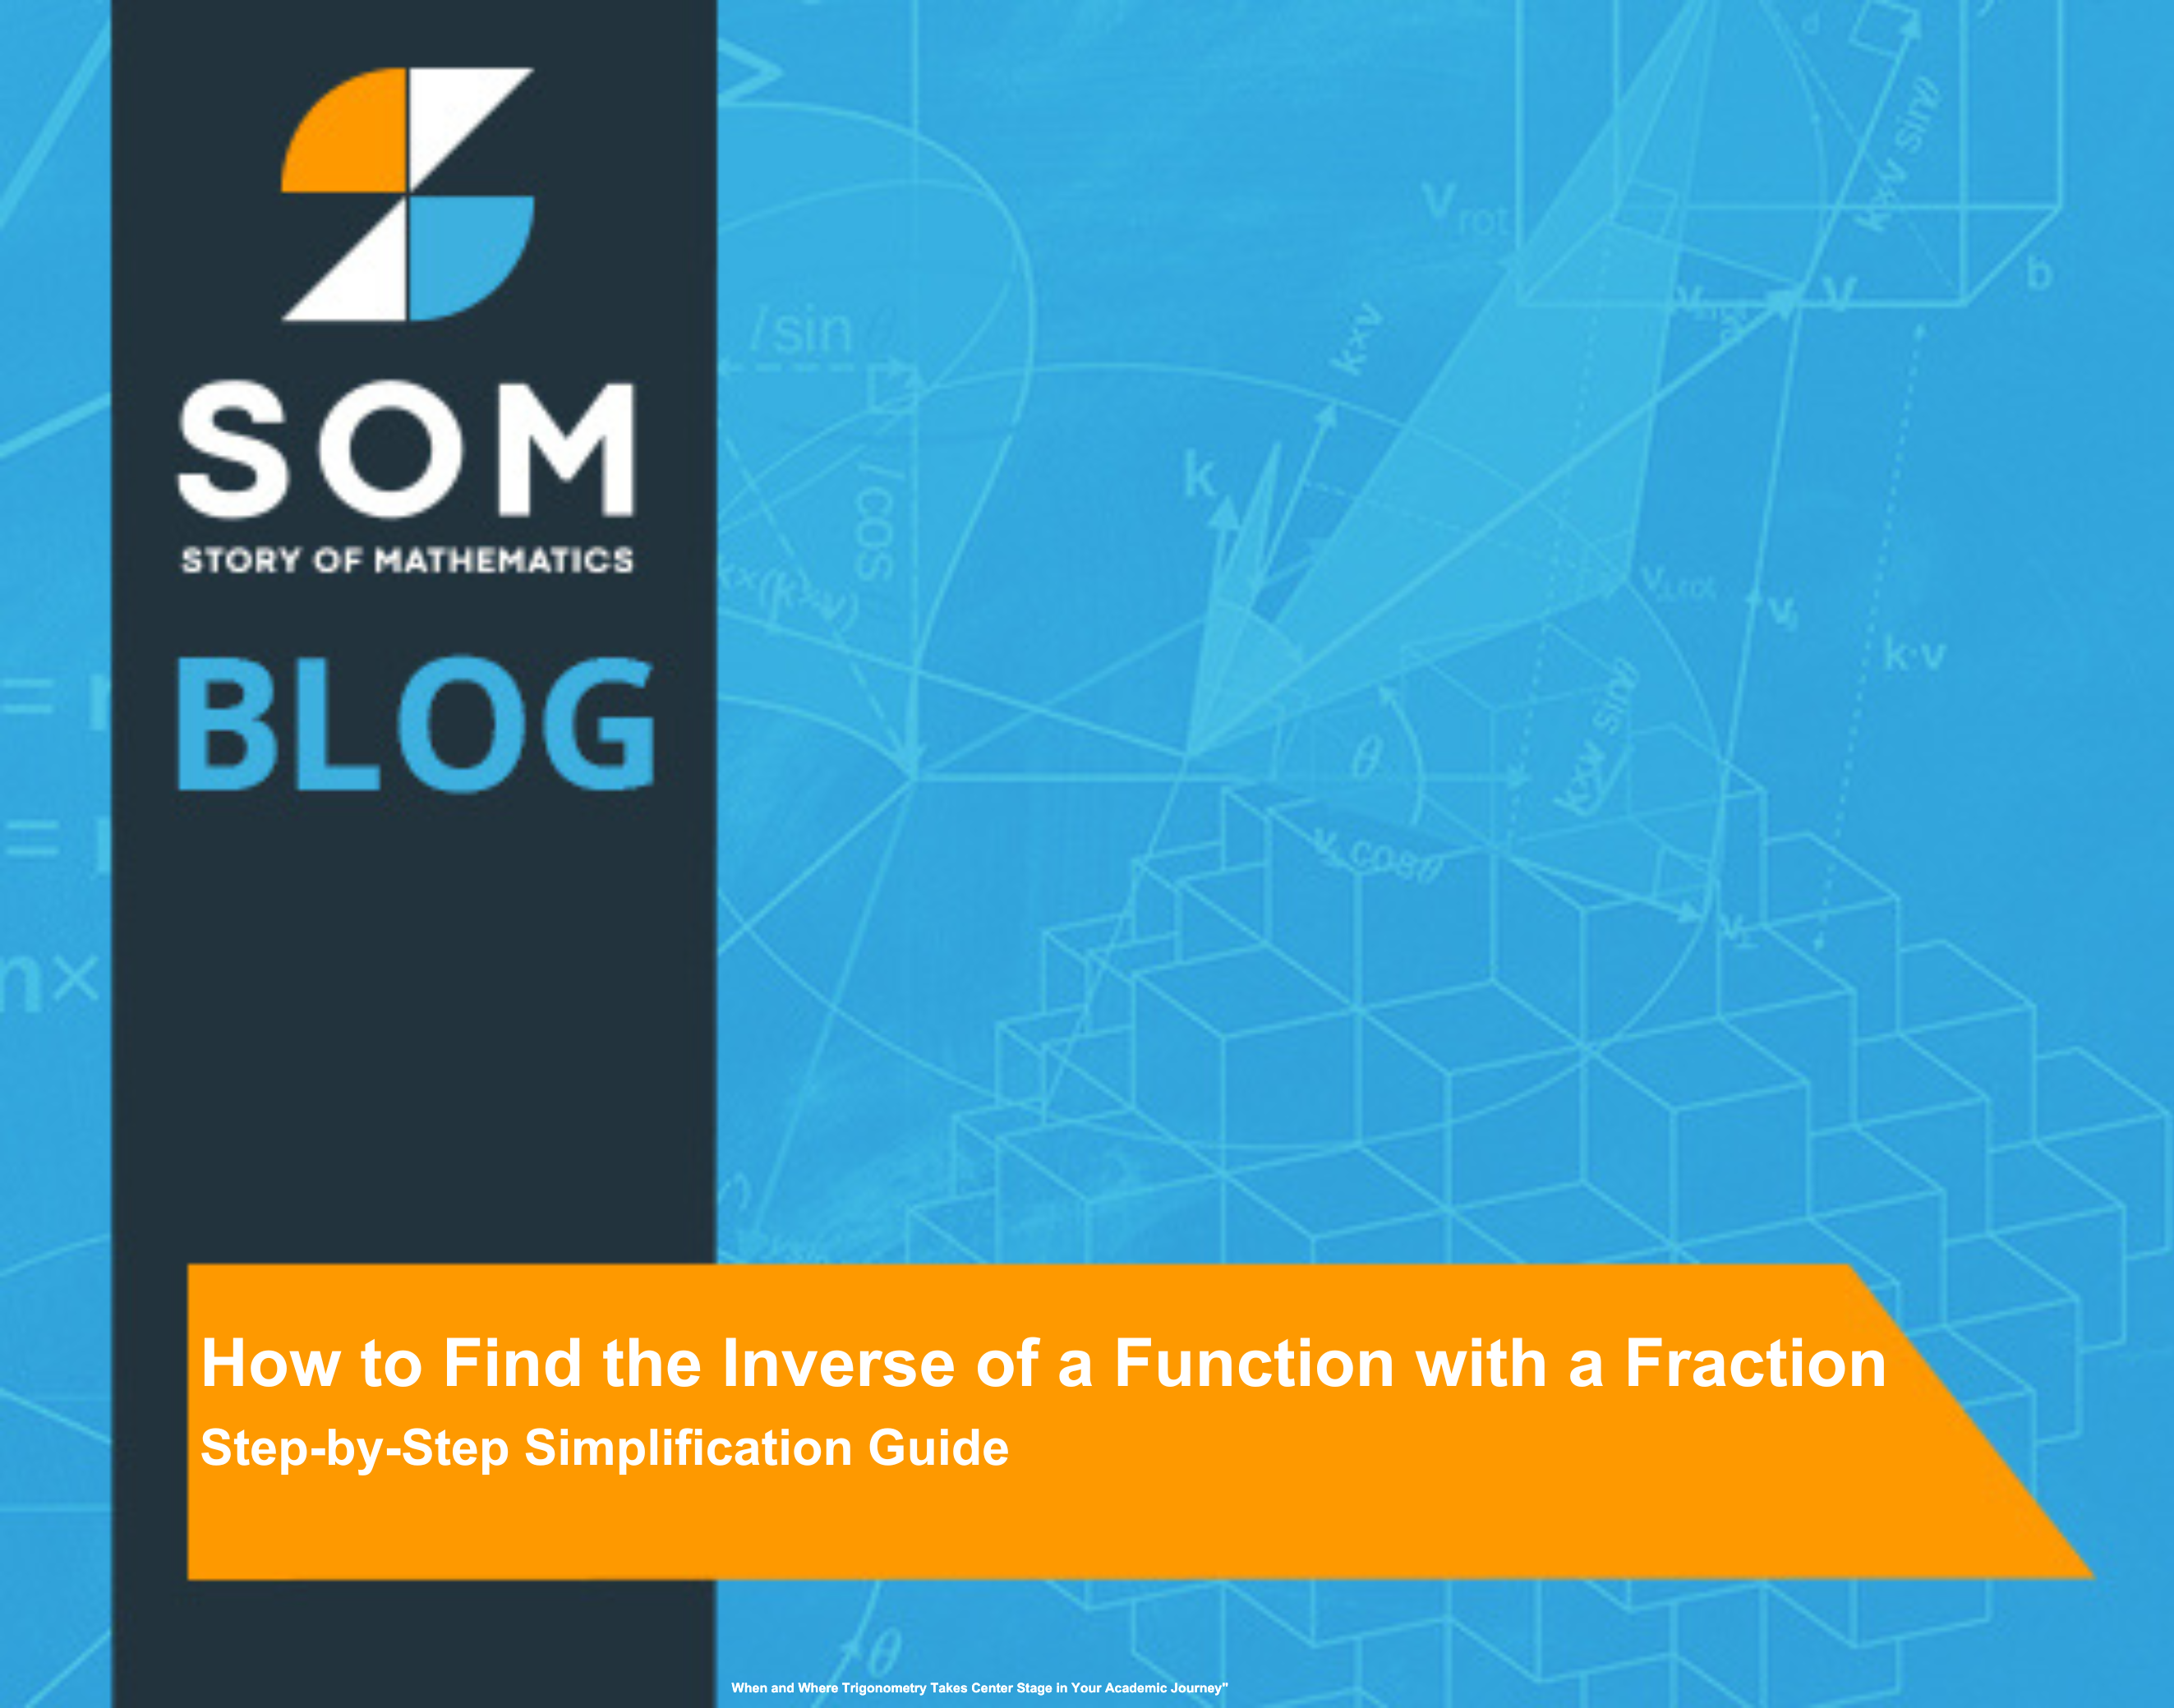 Feature Image How to Find the Inverse of a Function with a Fraction Step-by-Step Simplification Guide